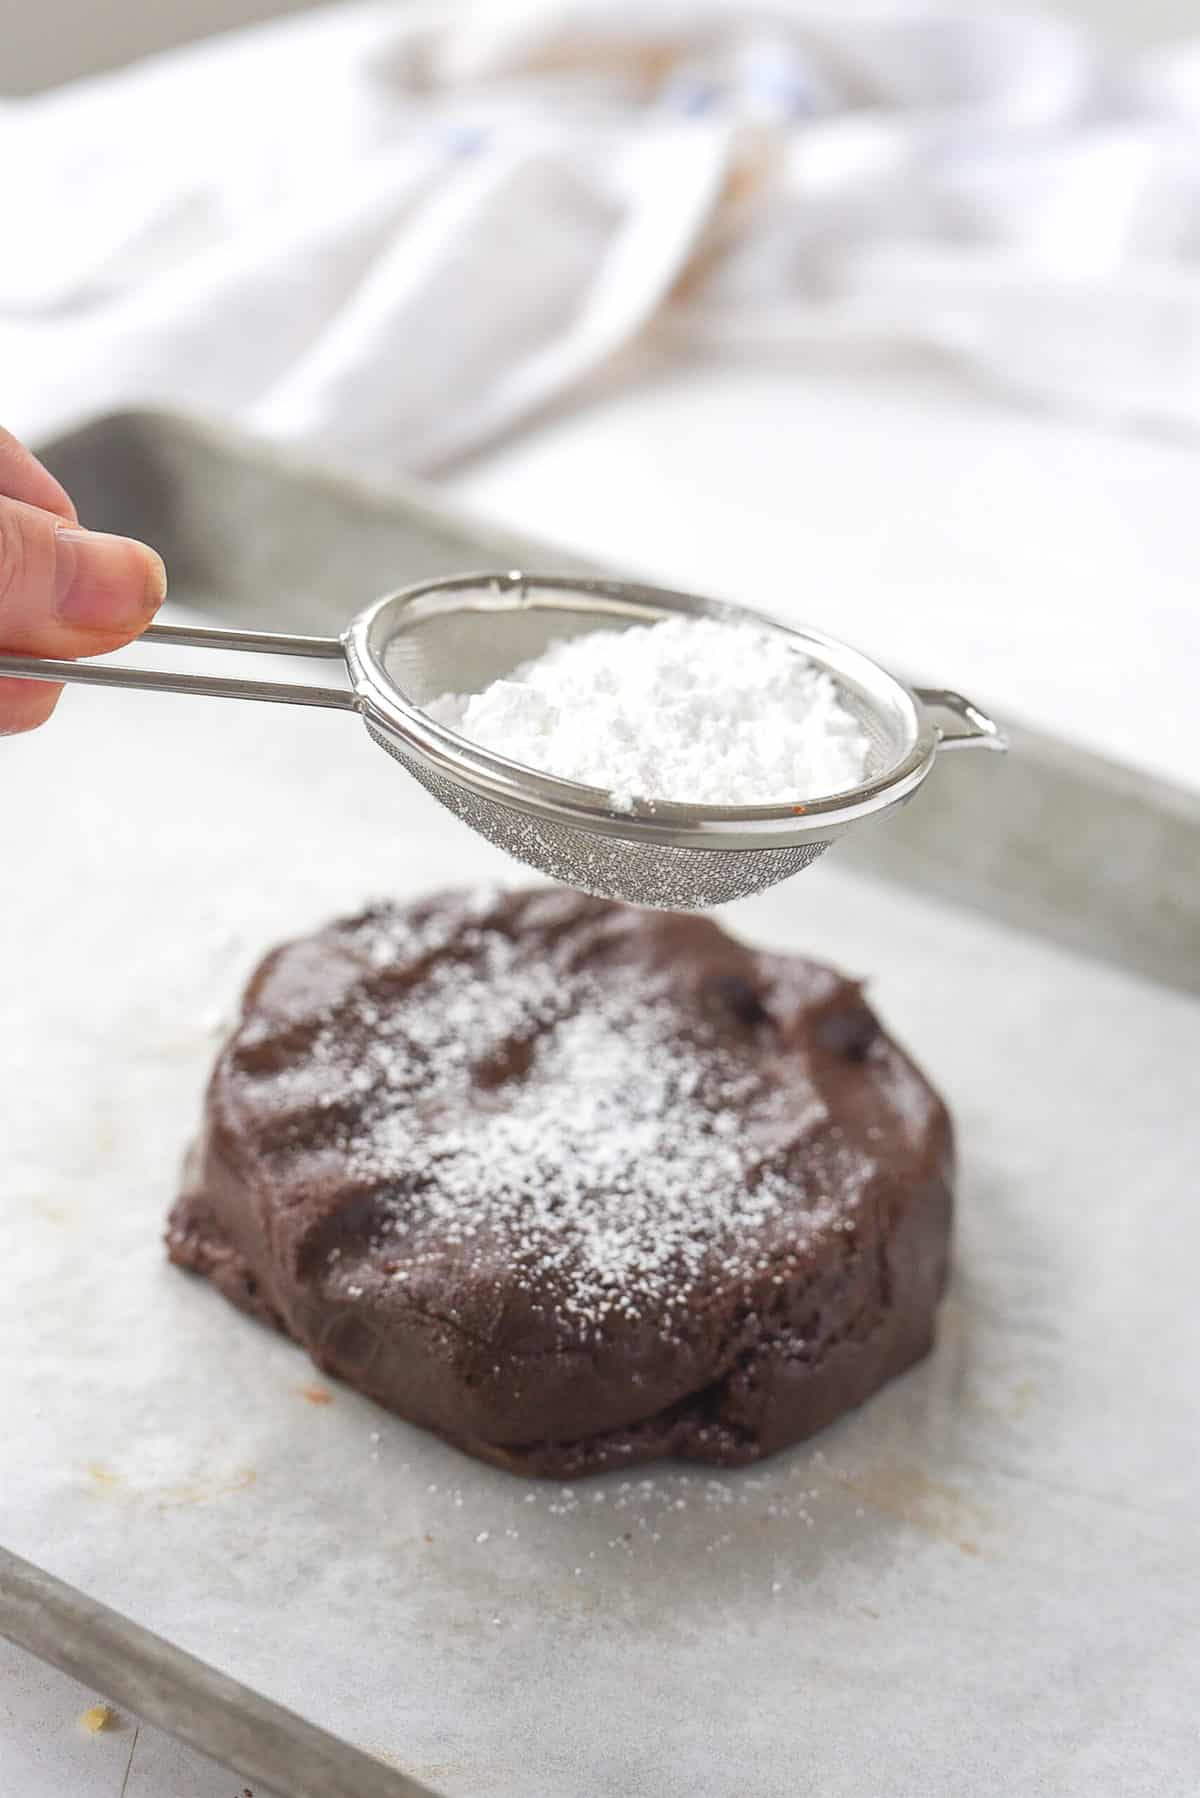 sprinkling cookie dough with powdered sugar